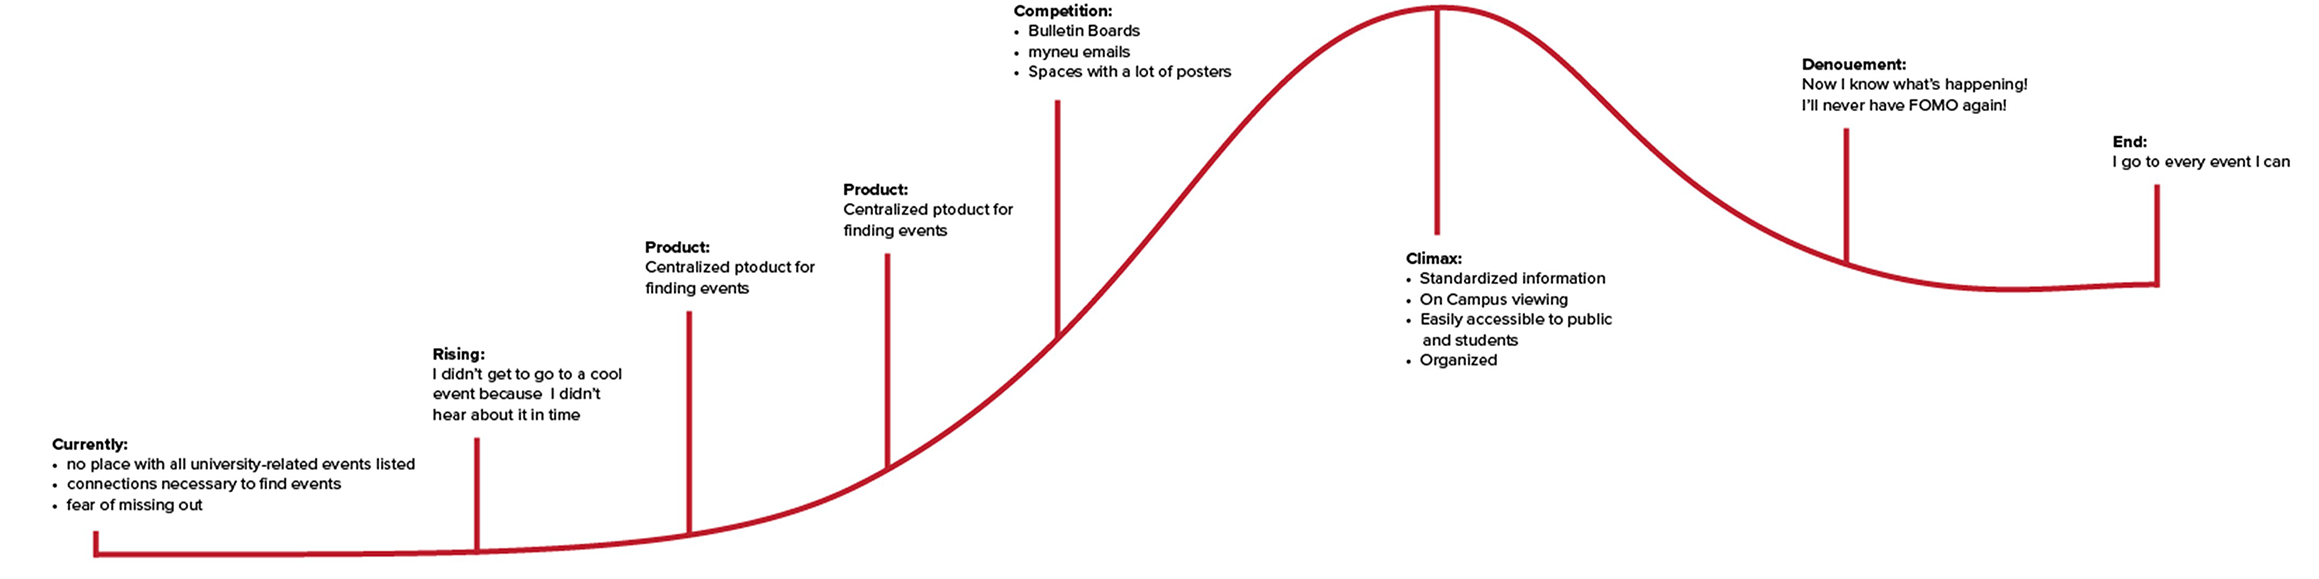 Narrative arc graph showing the user's journey